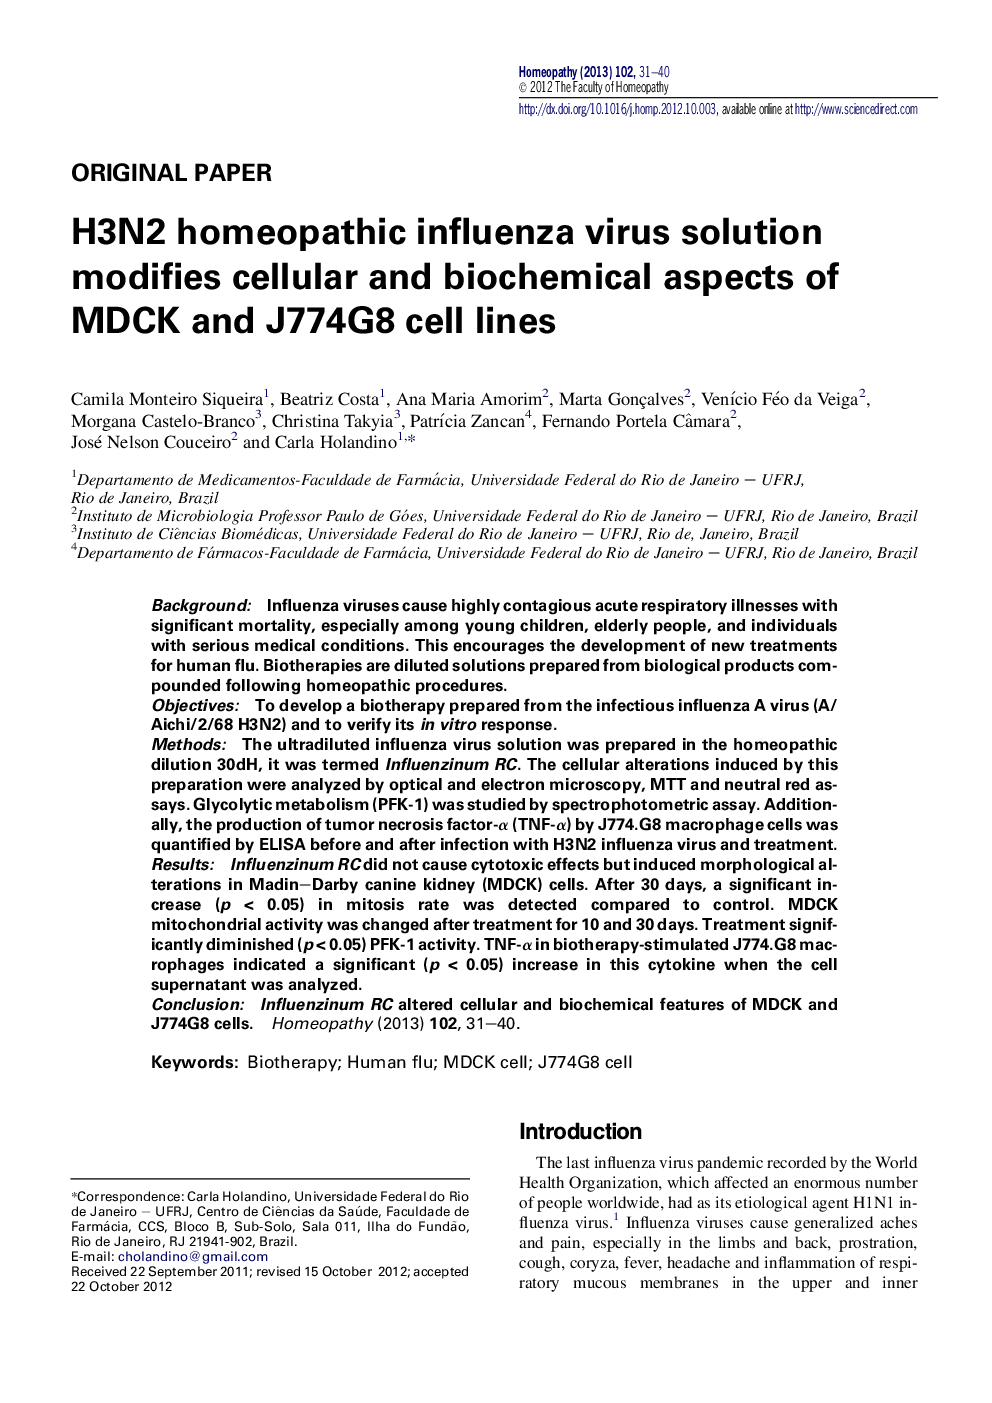 H3N2 homeopathic influenza virus solution modifies cellular and biochemical aspects of MDCK and J774G8 cell lines